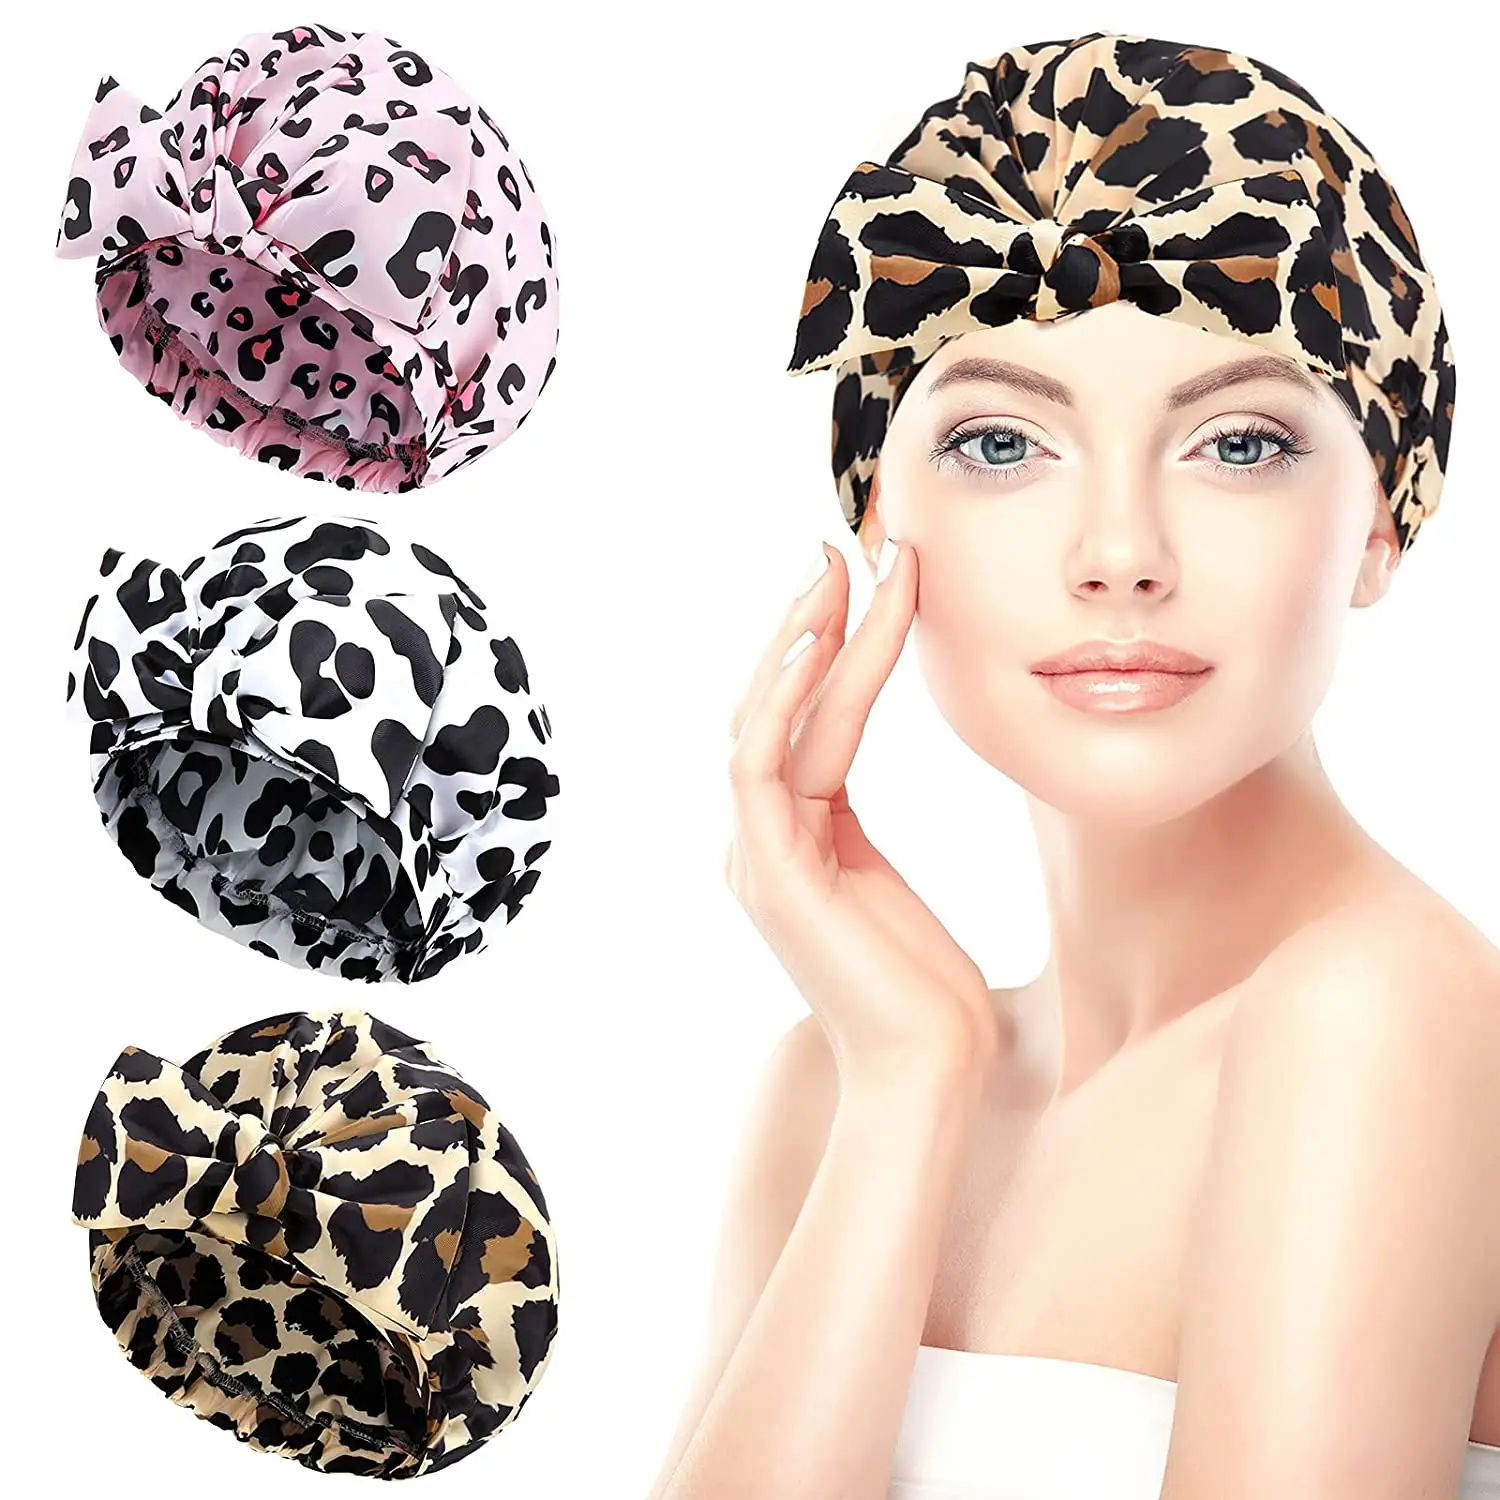 Custom Leopard Print New Luxury Adjustable Bow Waterproof Shower Cap For Women With Long Curly Hair